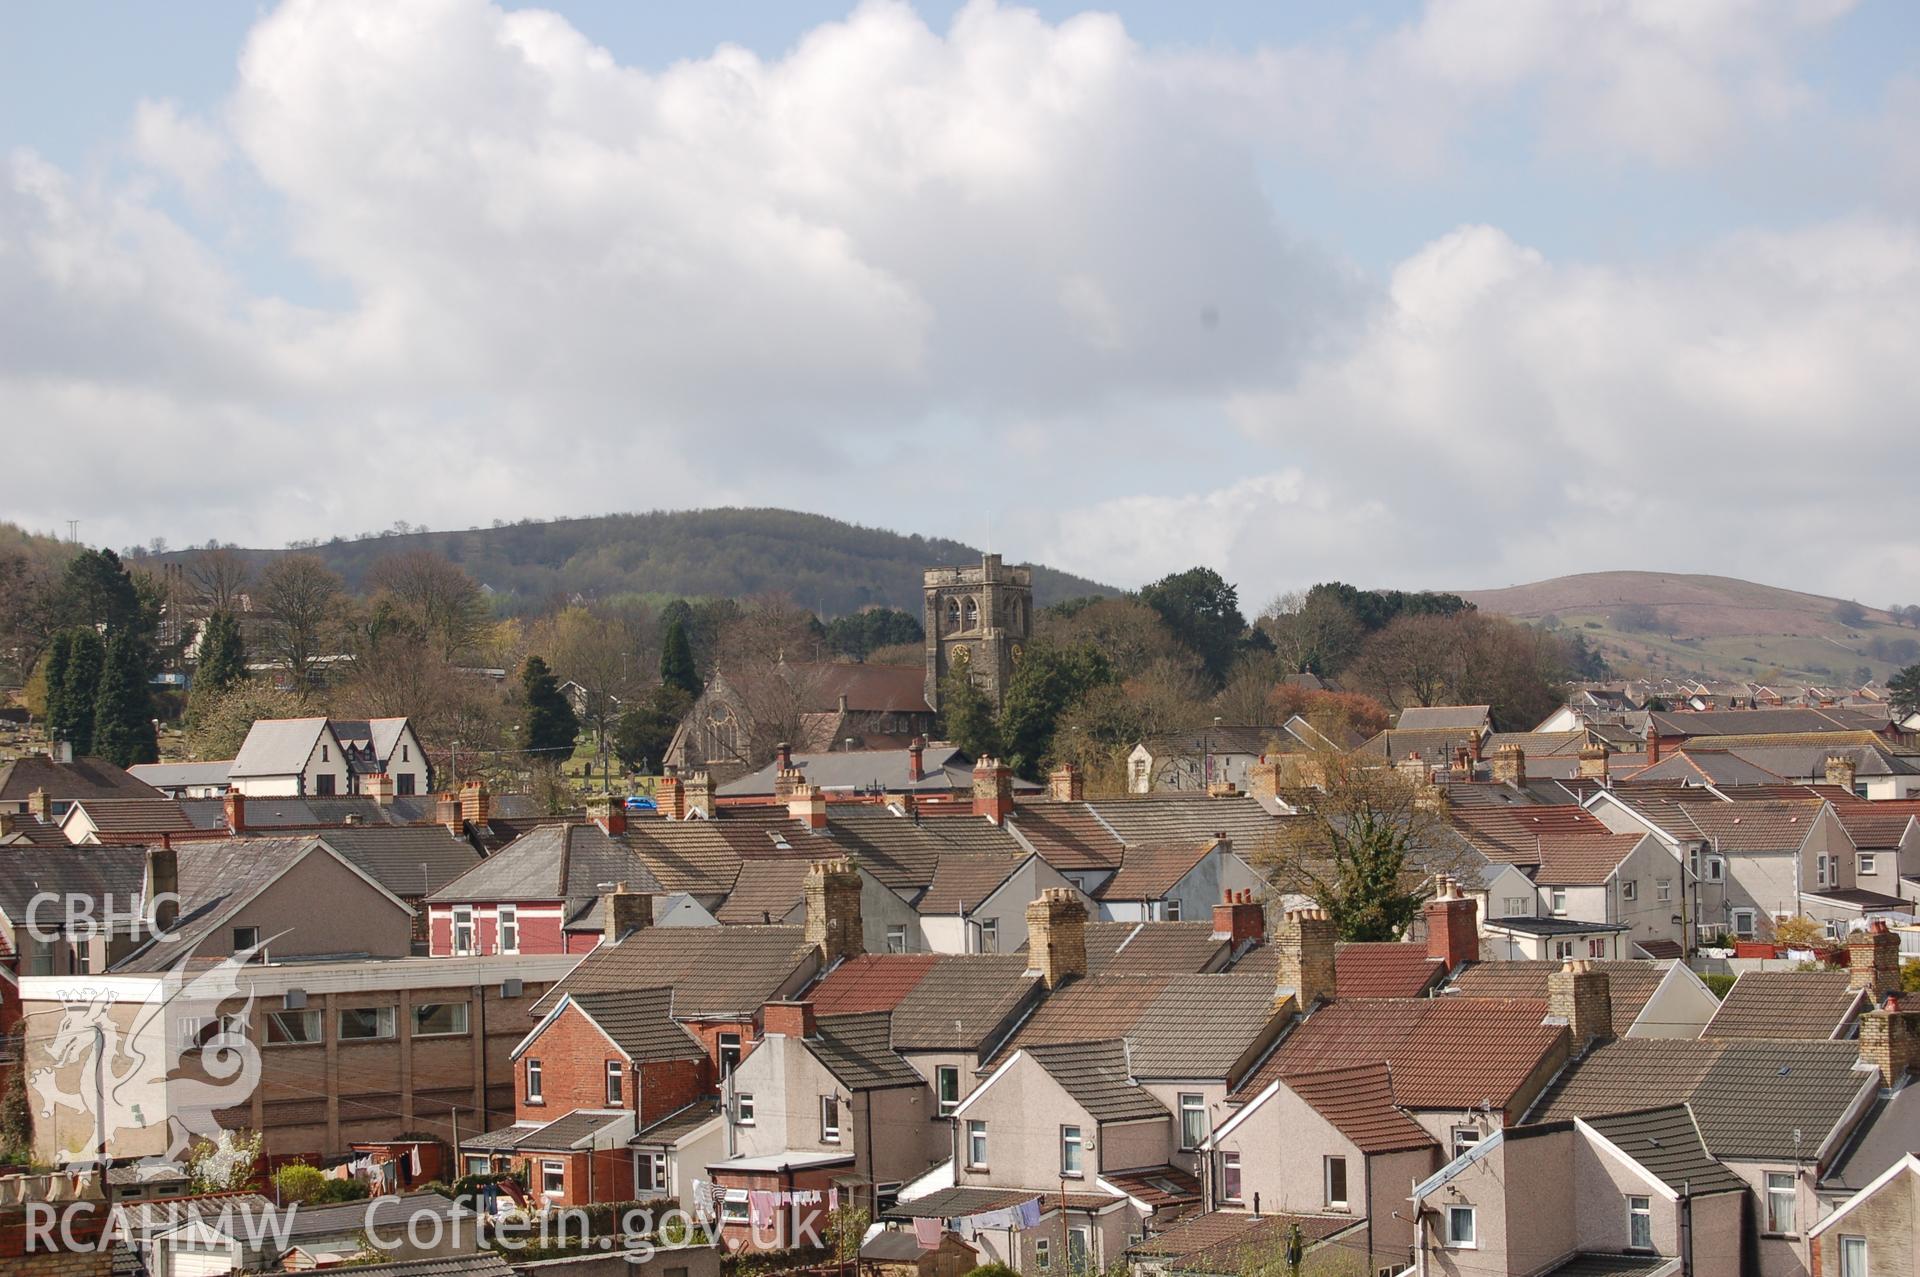 Digital colour photograph showing a view of St Martins Church, Caerphilly, from the roof of the Van Road United Reformed Church.